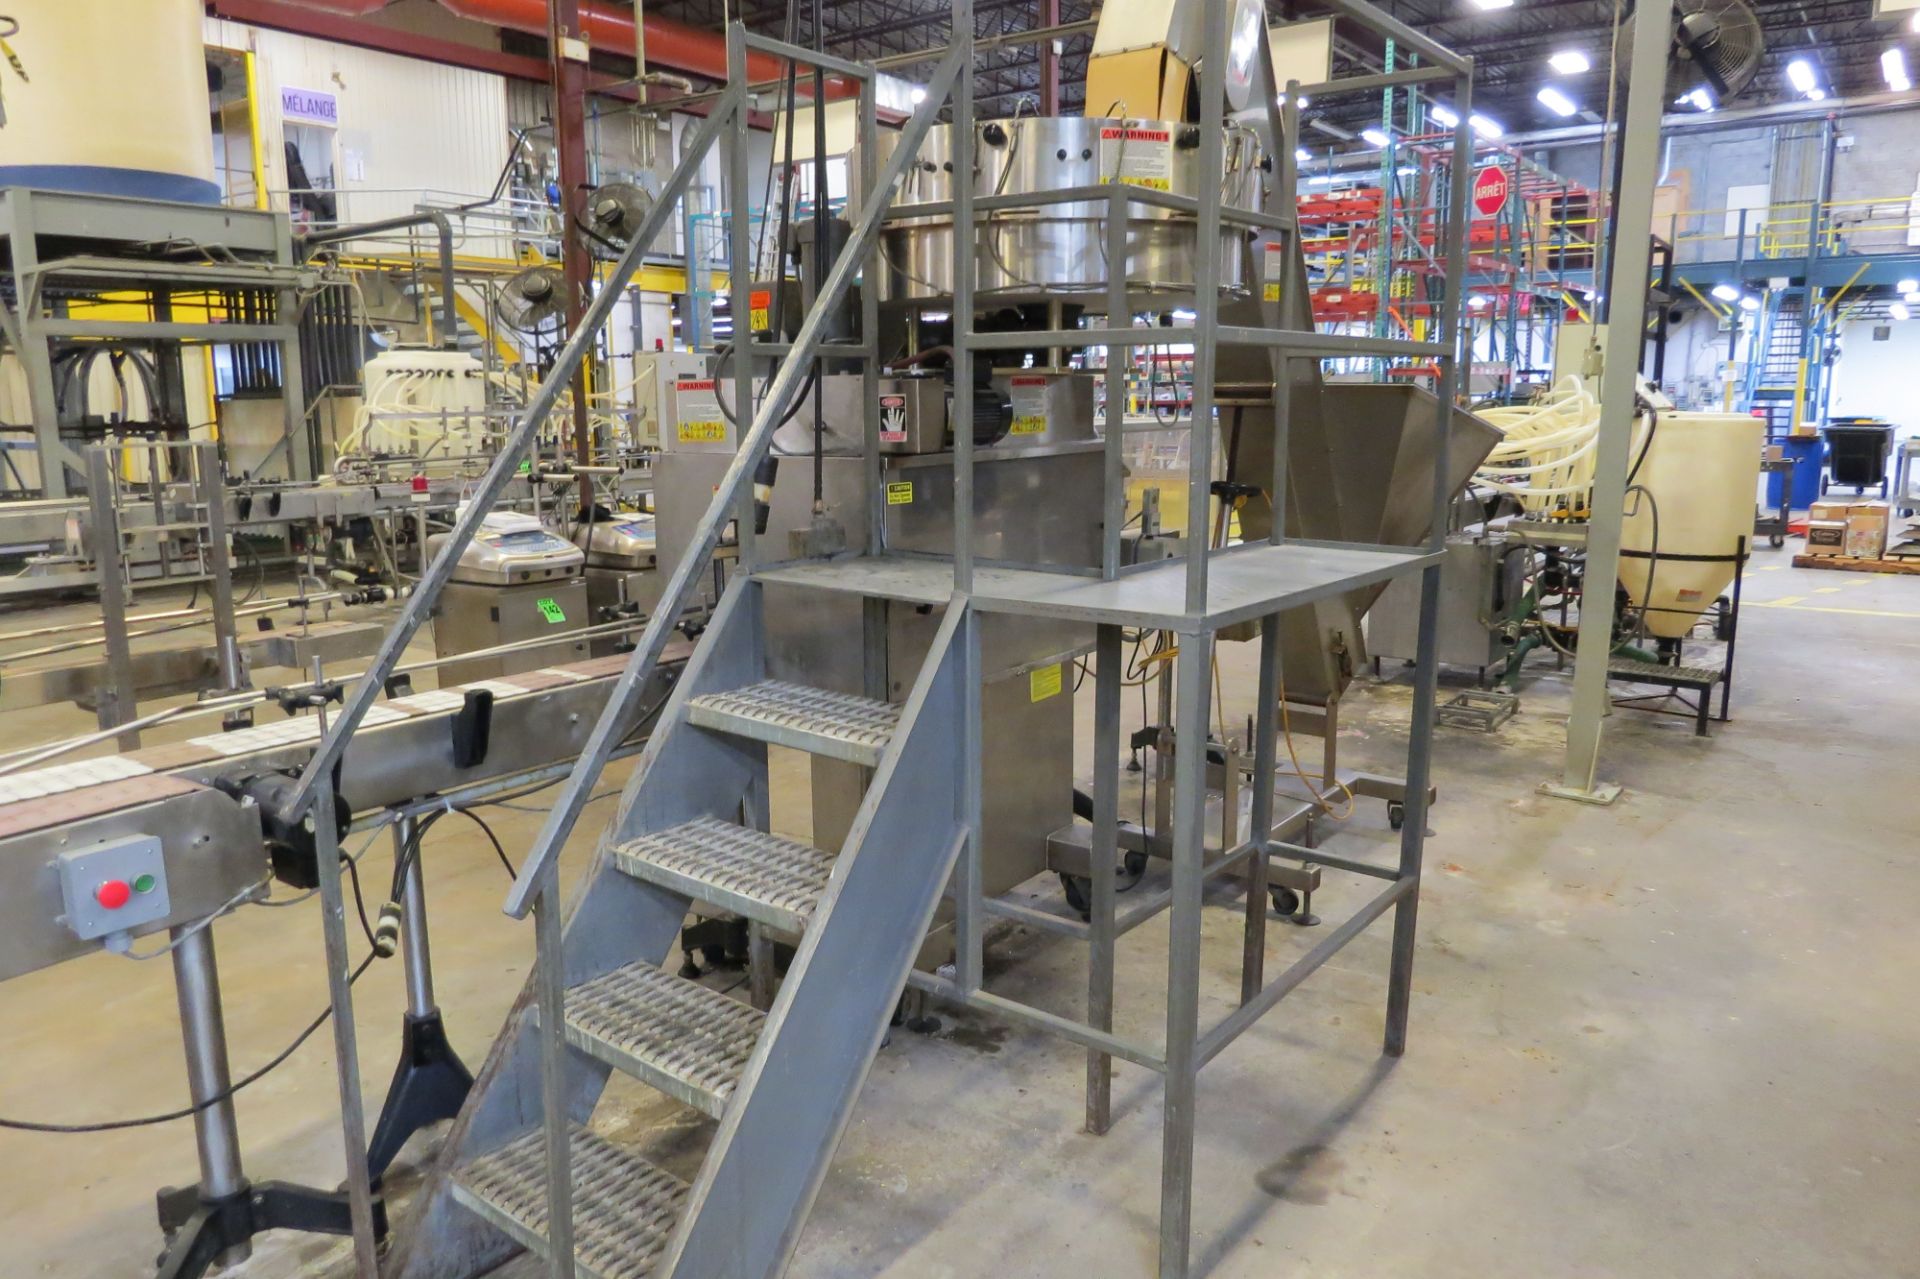 KAPS-ALL A6 6-Spindle Auto-Capper, ser. 6351, with KAPS-ALL cap feeder/elevator, motorized conveyor - Image 15 of 25